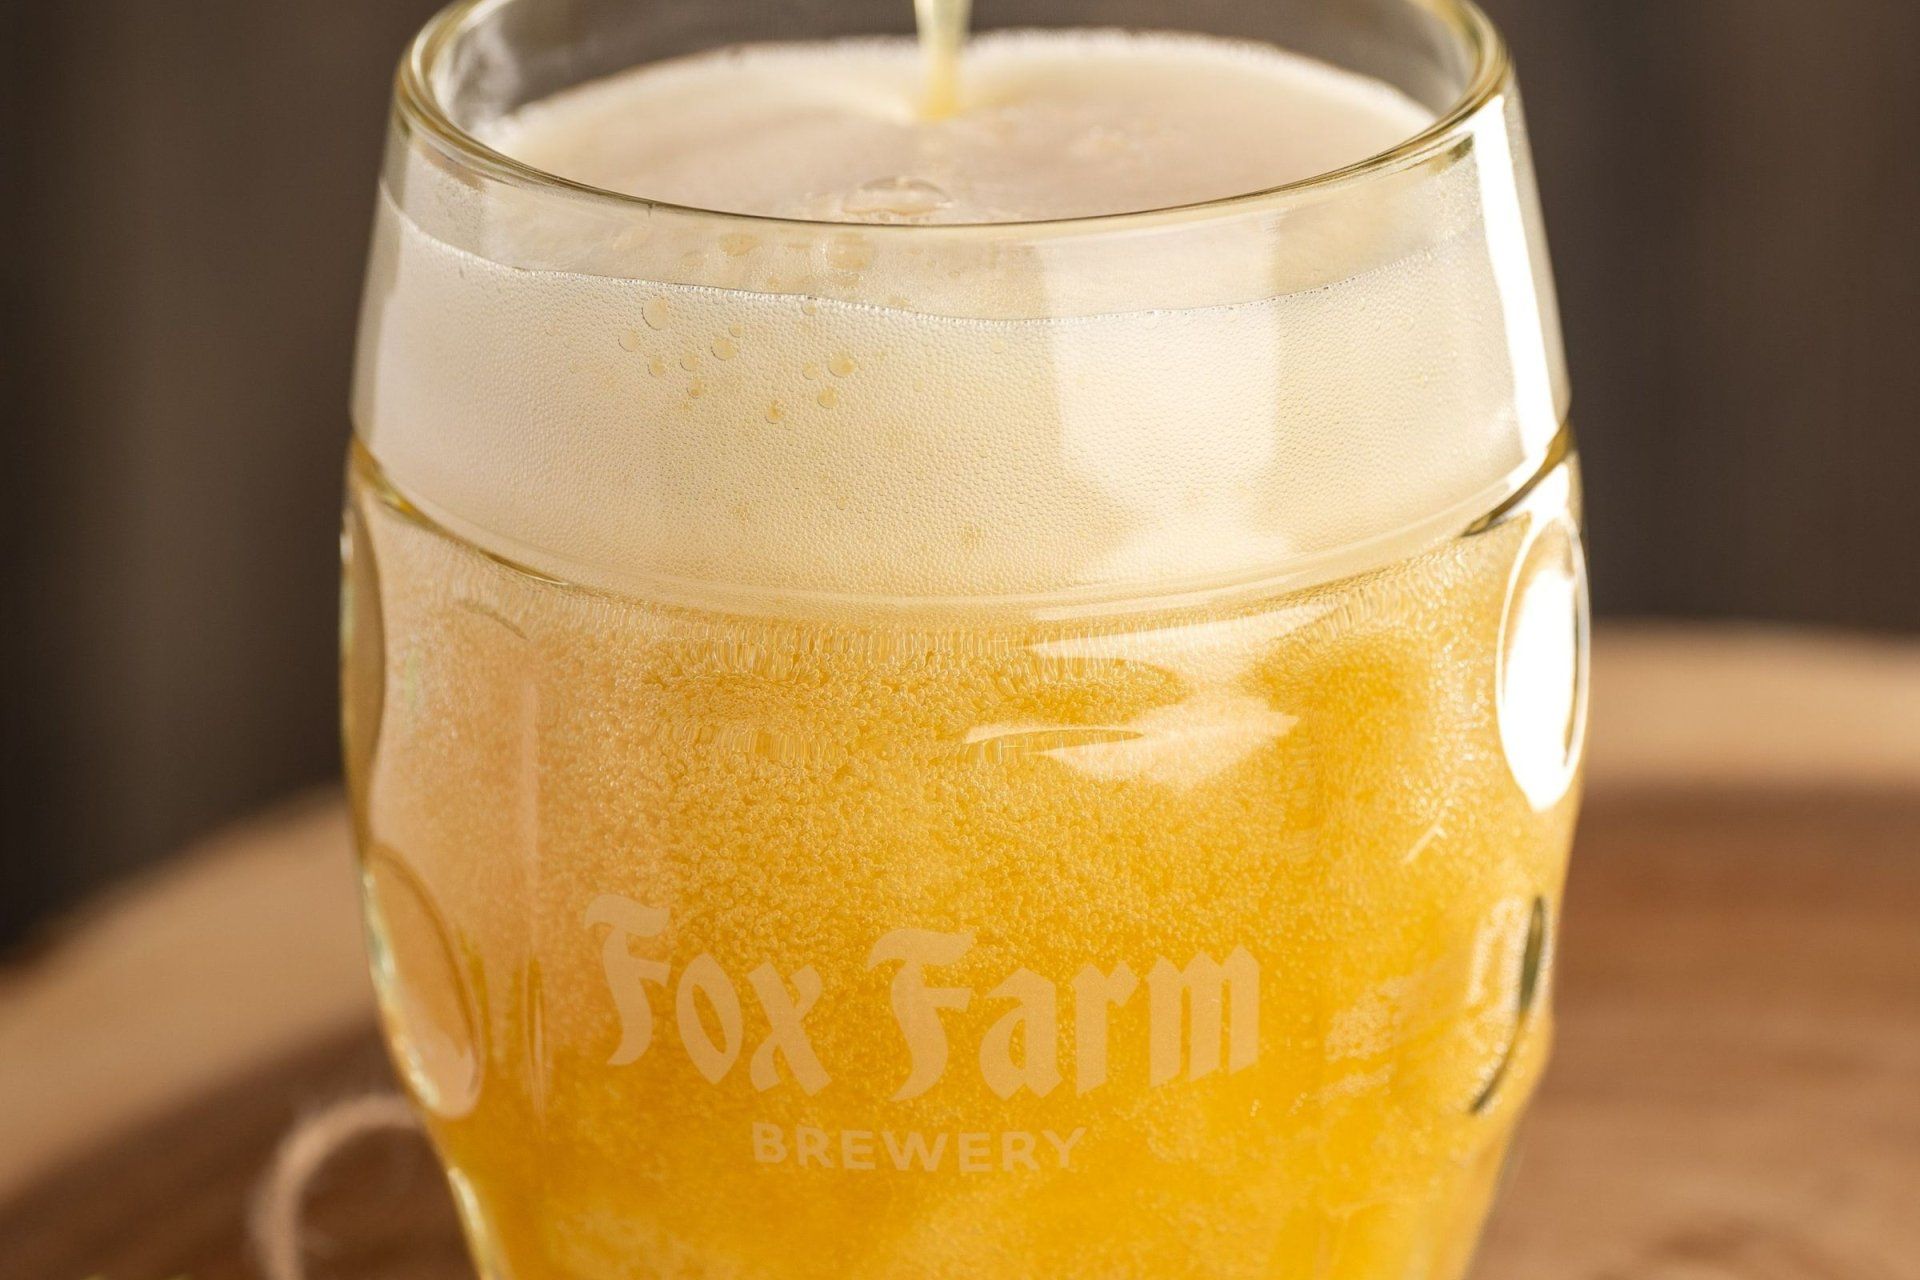 a glass that says fox farm brewery on it